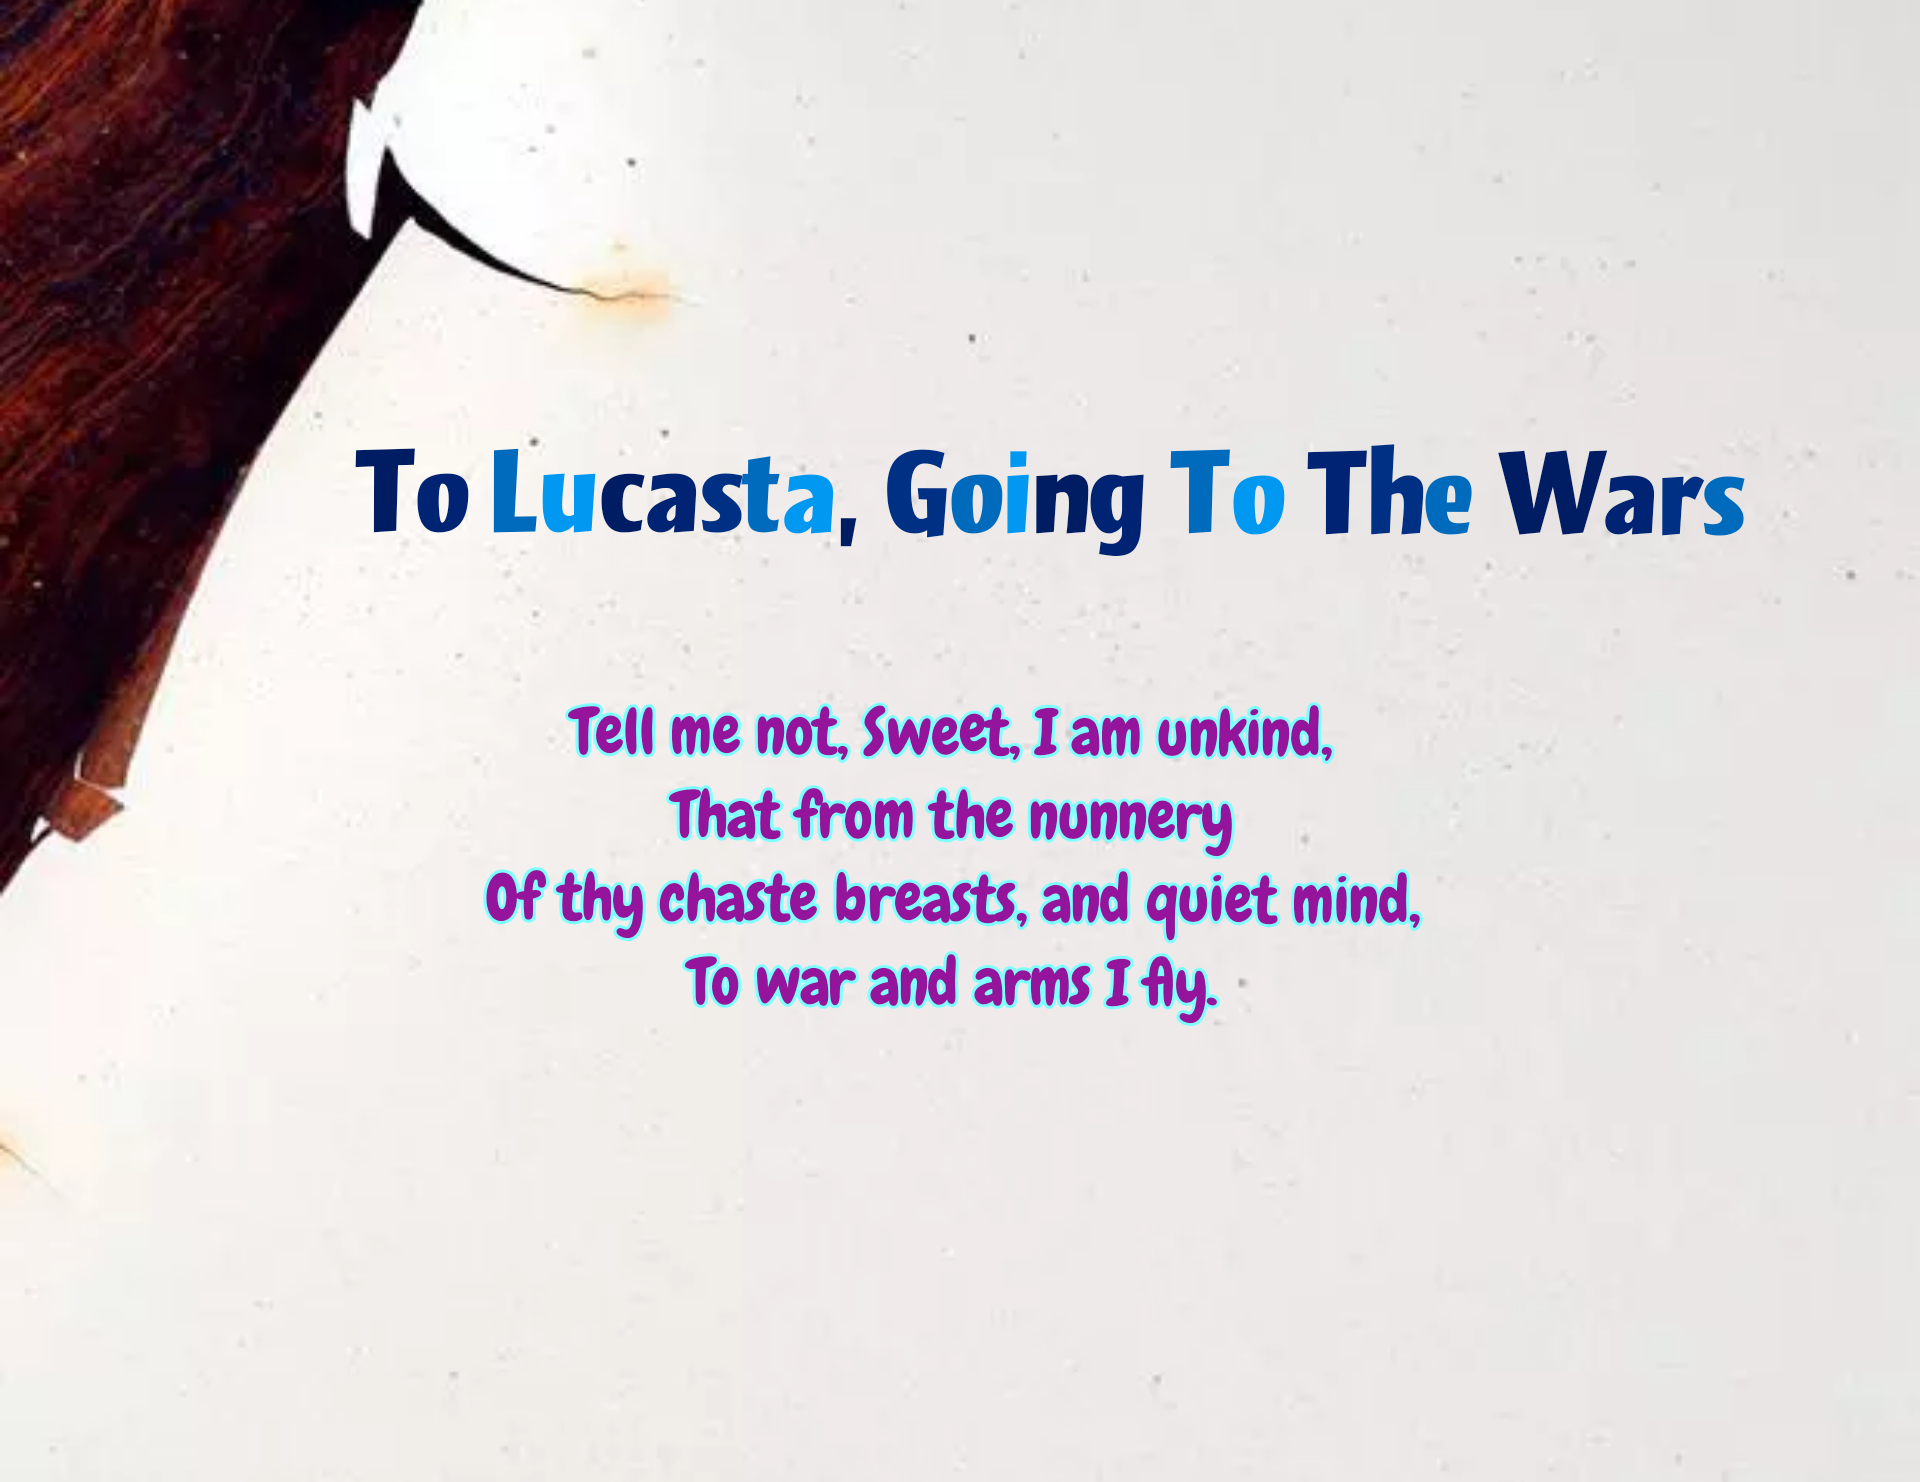 To Lucasta, Going to the Wars - Summary and Questions 1